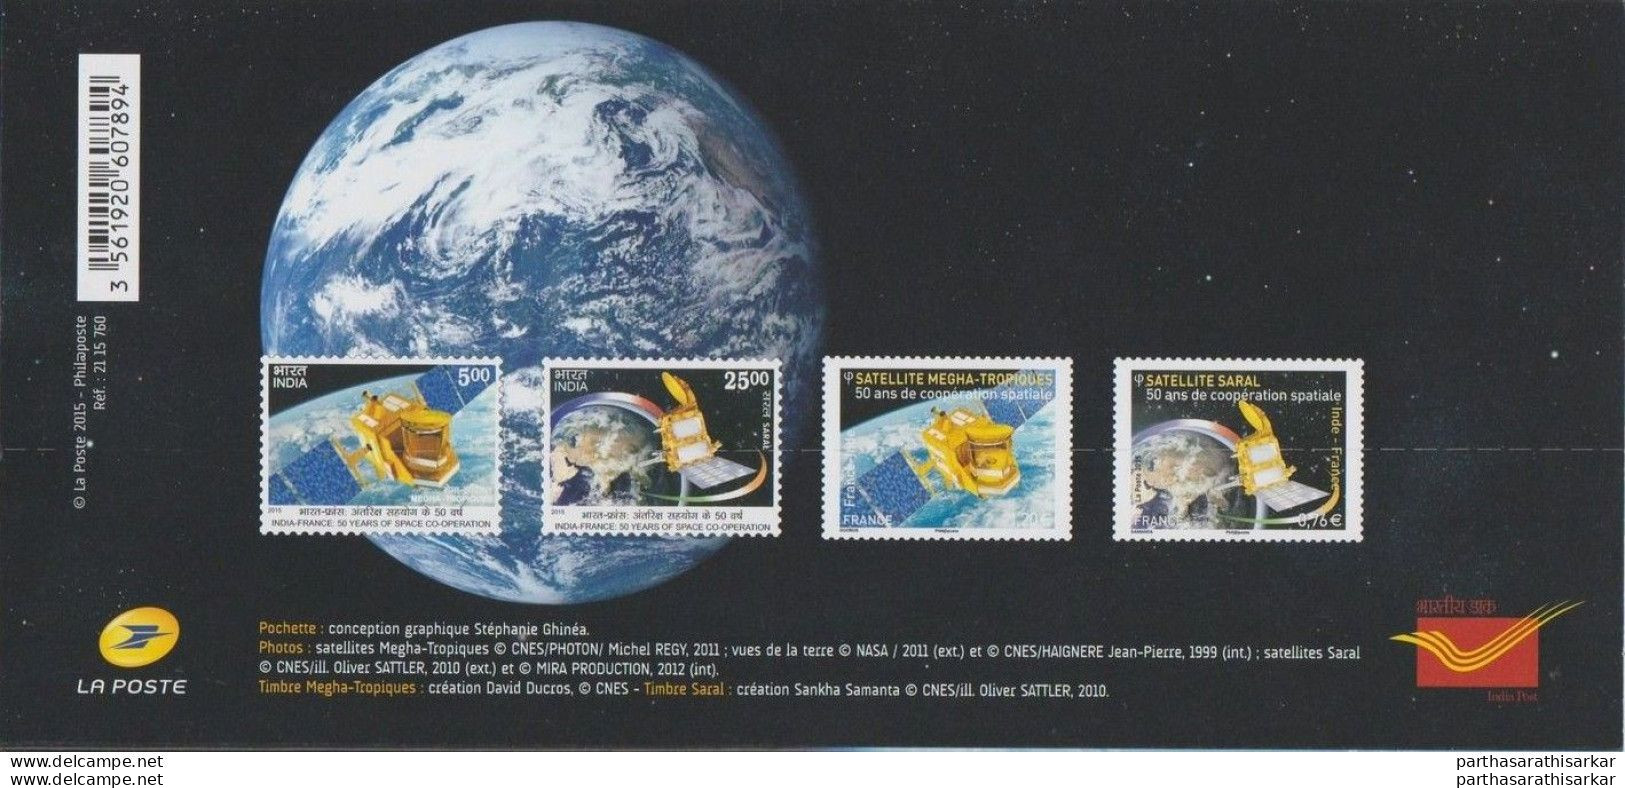 FRANCE 2015 JOINT ISSUE WITH INDIA SPACE PROGRAM OFFICIAL PRESENTATION PACK EXTREMELY RARE HARD TO FIND MNH - 2013-2018 Marianne (Ciappa-Kawena)